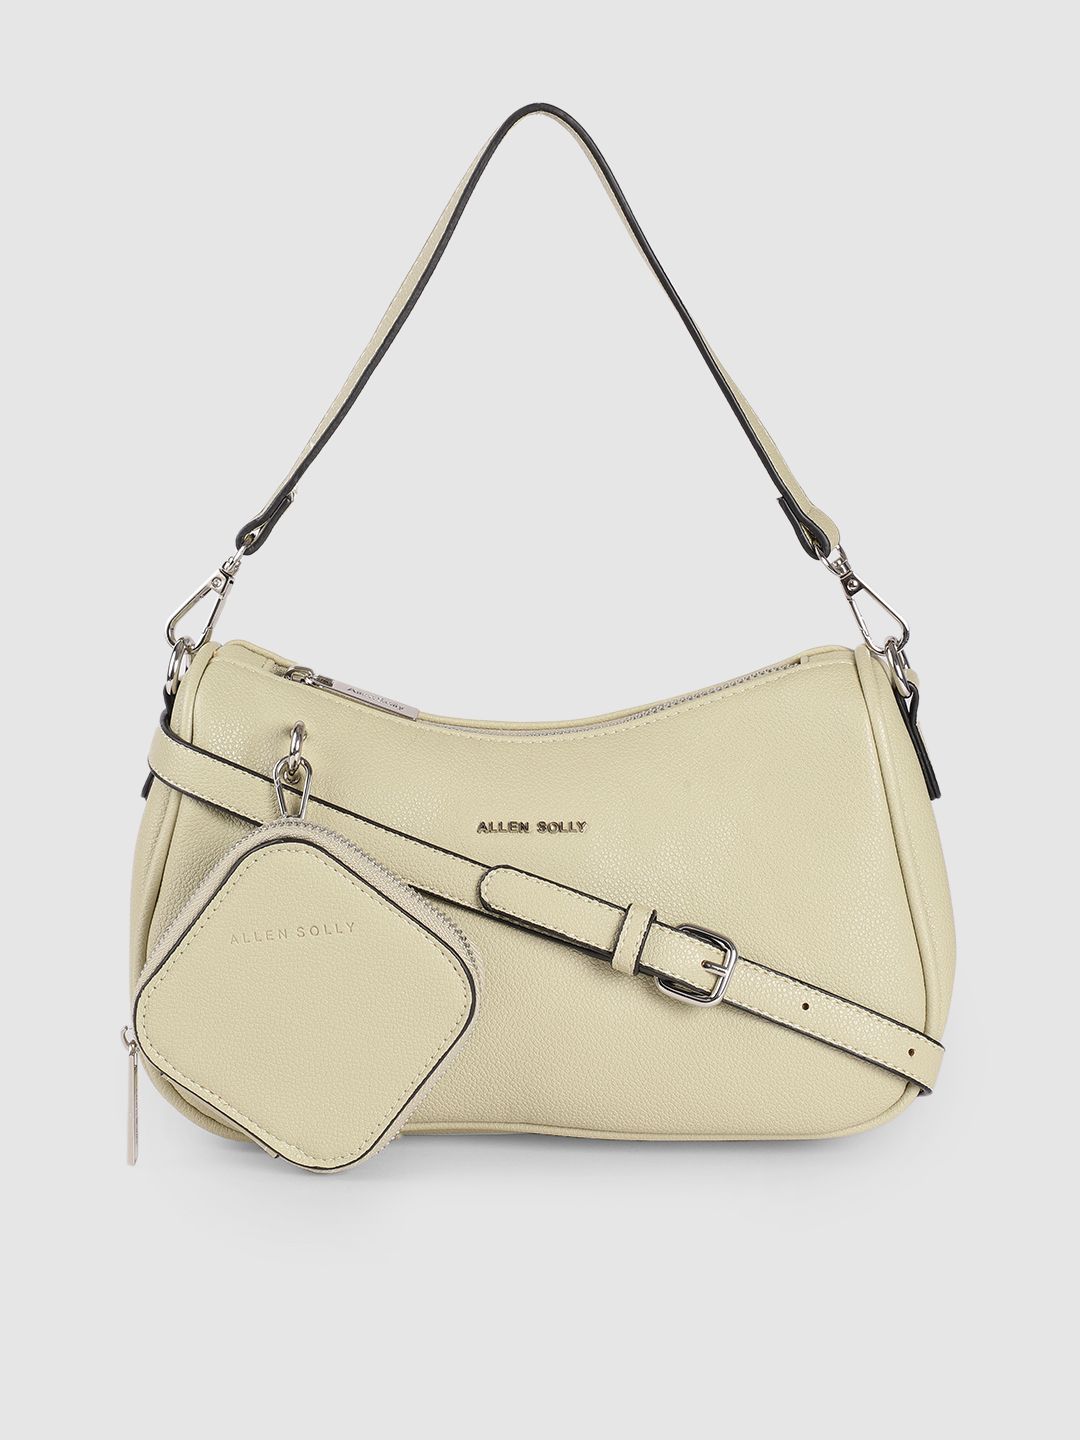 Allen Solly Green PU Structured Hobo Bag Price in India